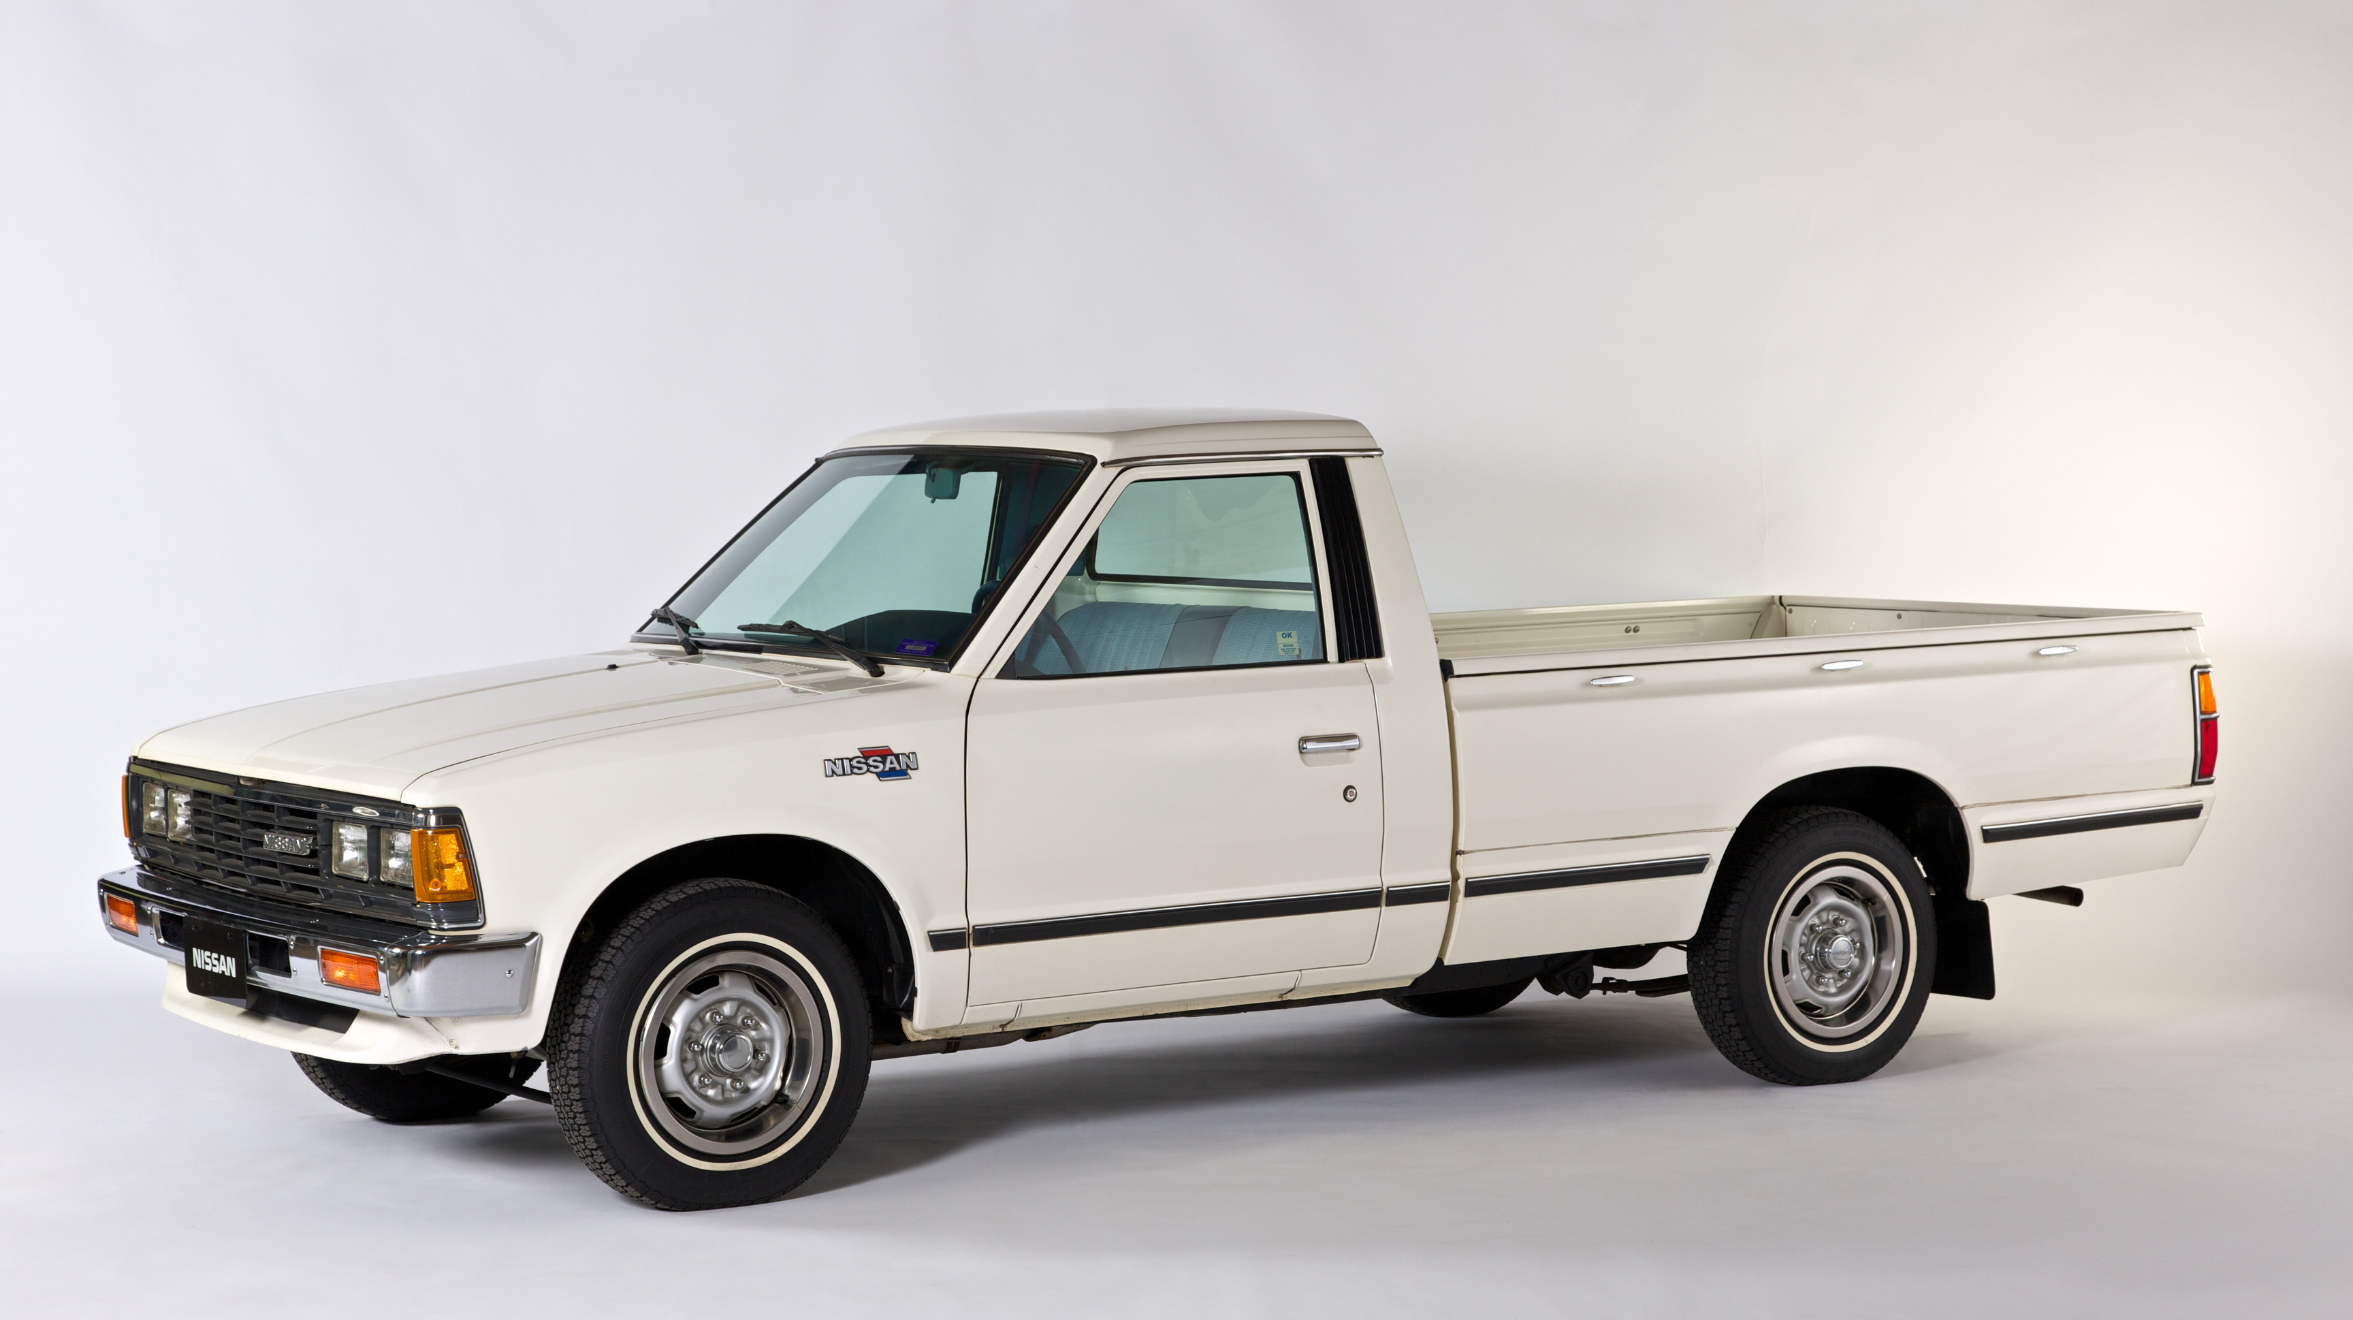 The first Nissan vehicle, a white pickup truck, manufactured in the United States is on display against a white backdrop